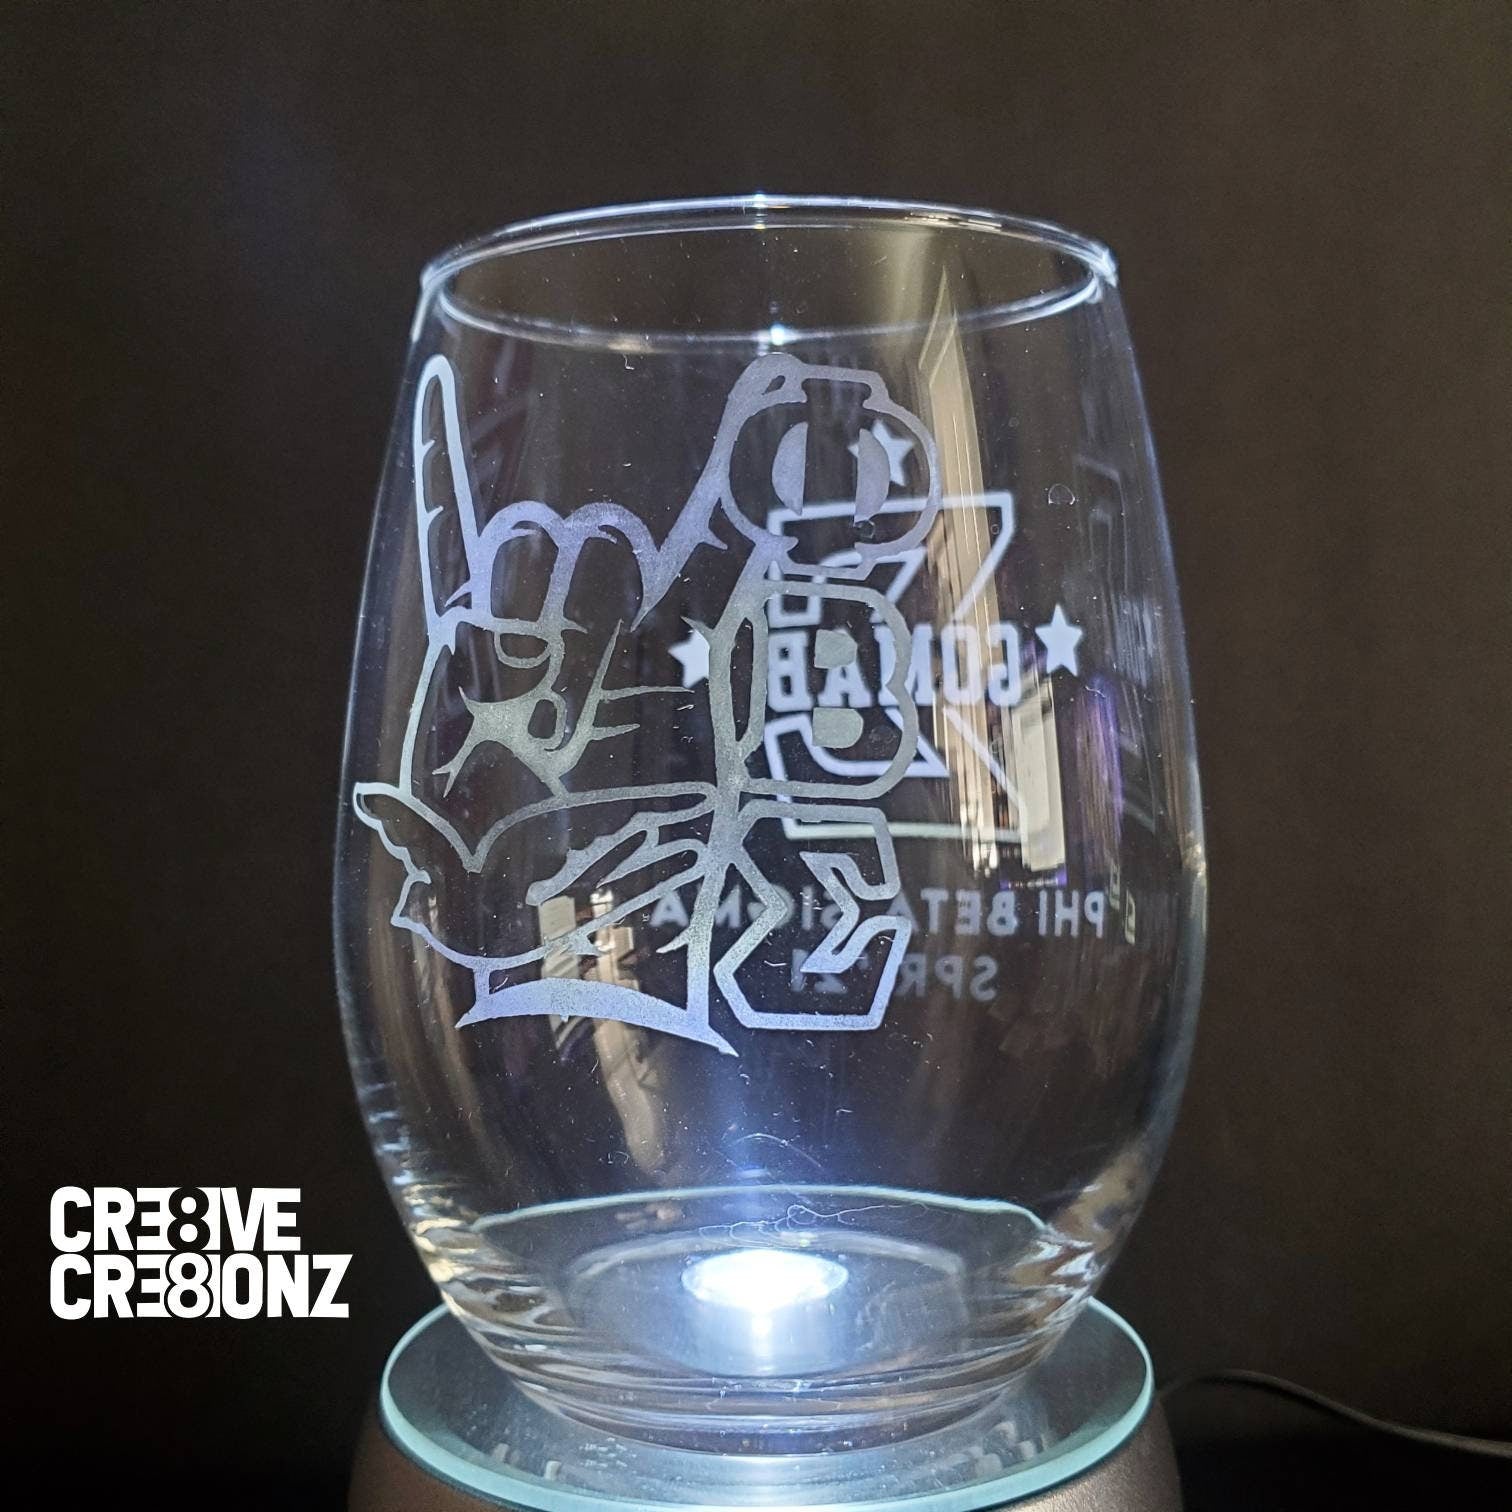 Phi Beta Sigma Glass - Cre8ive Cre8ionz